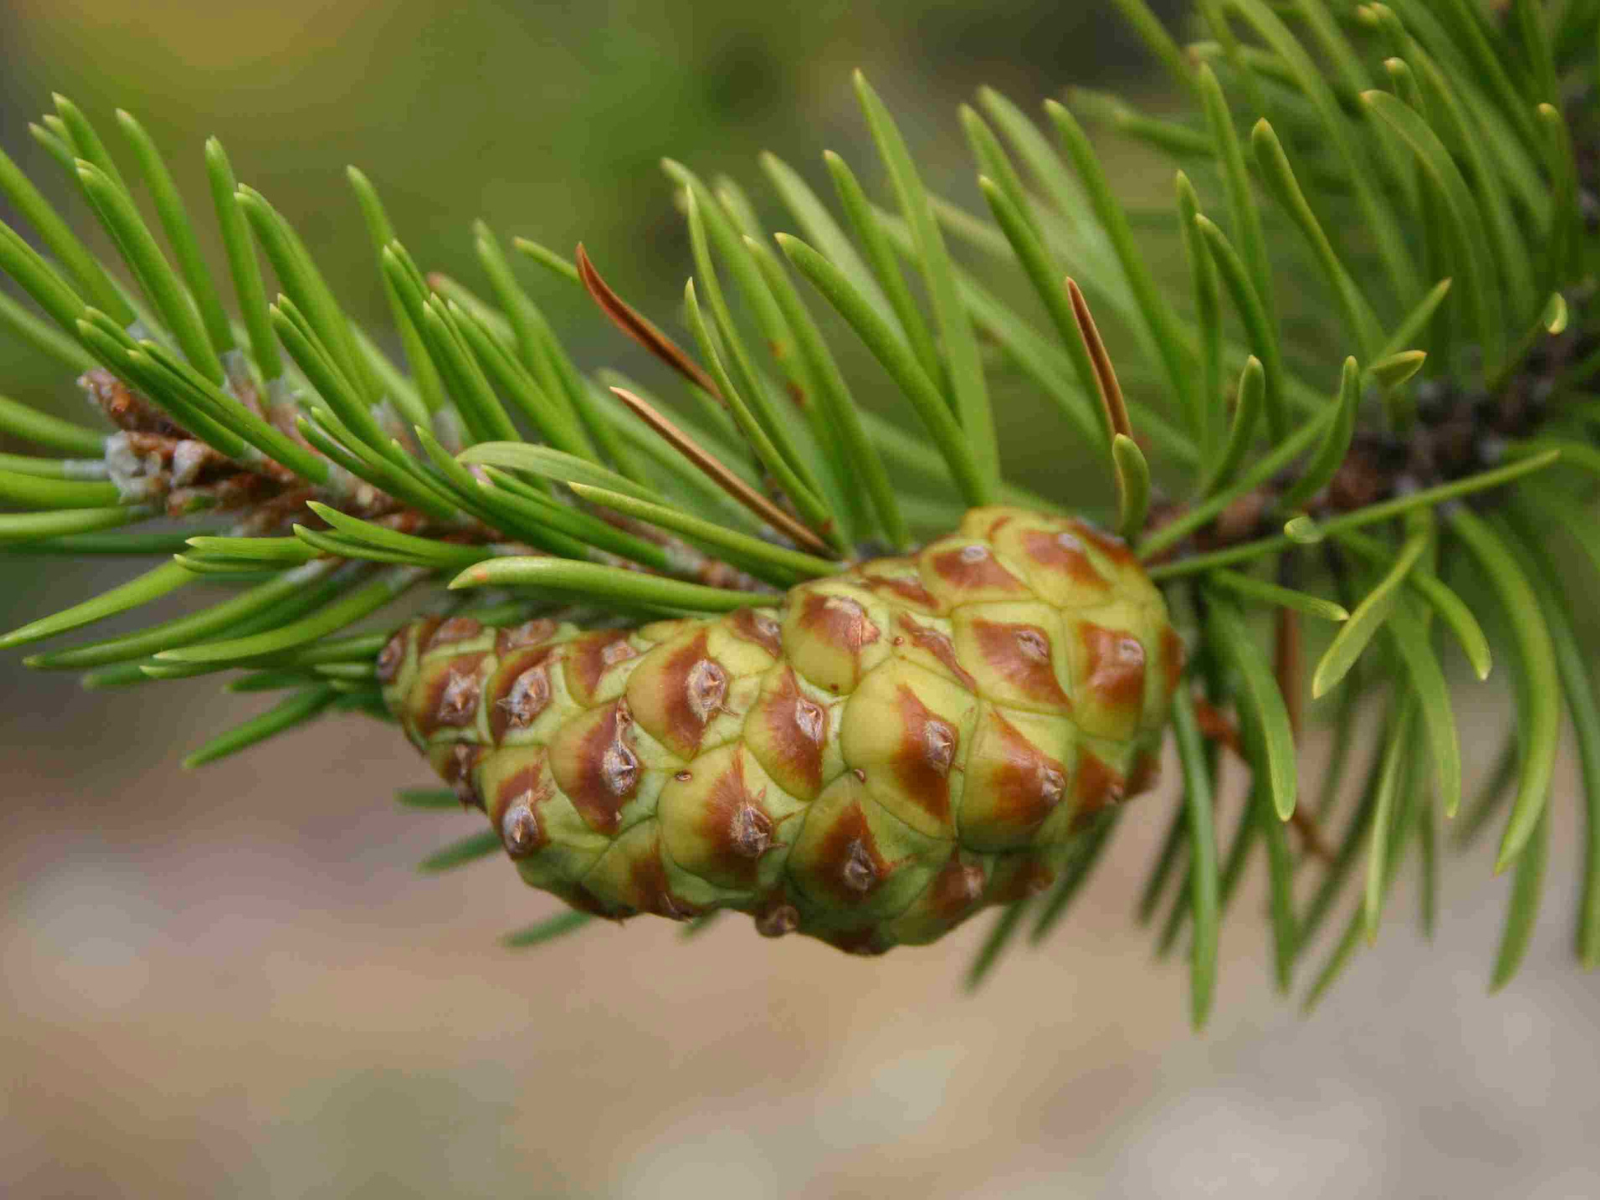 A green pine cone with brown tips growing on a Jack pine tree branch.